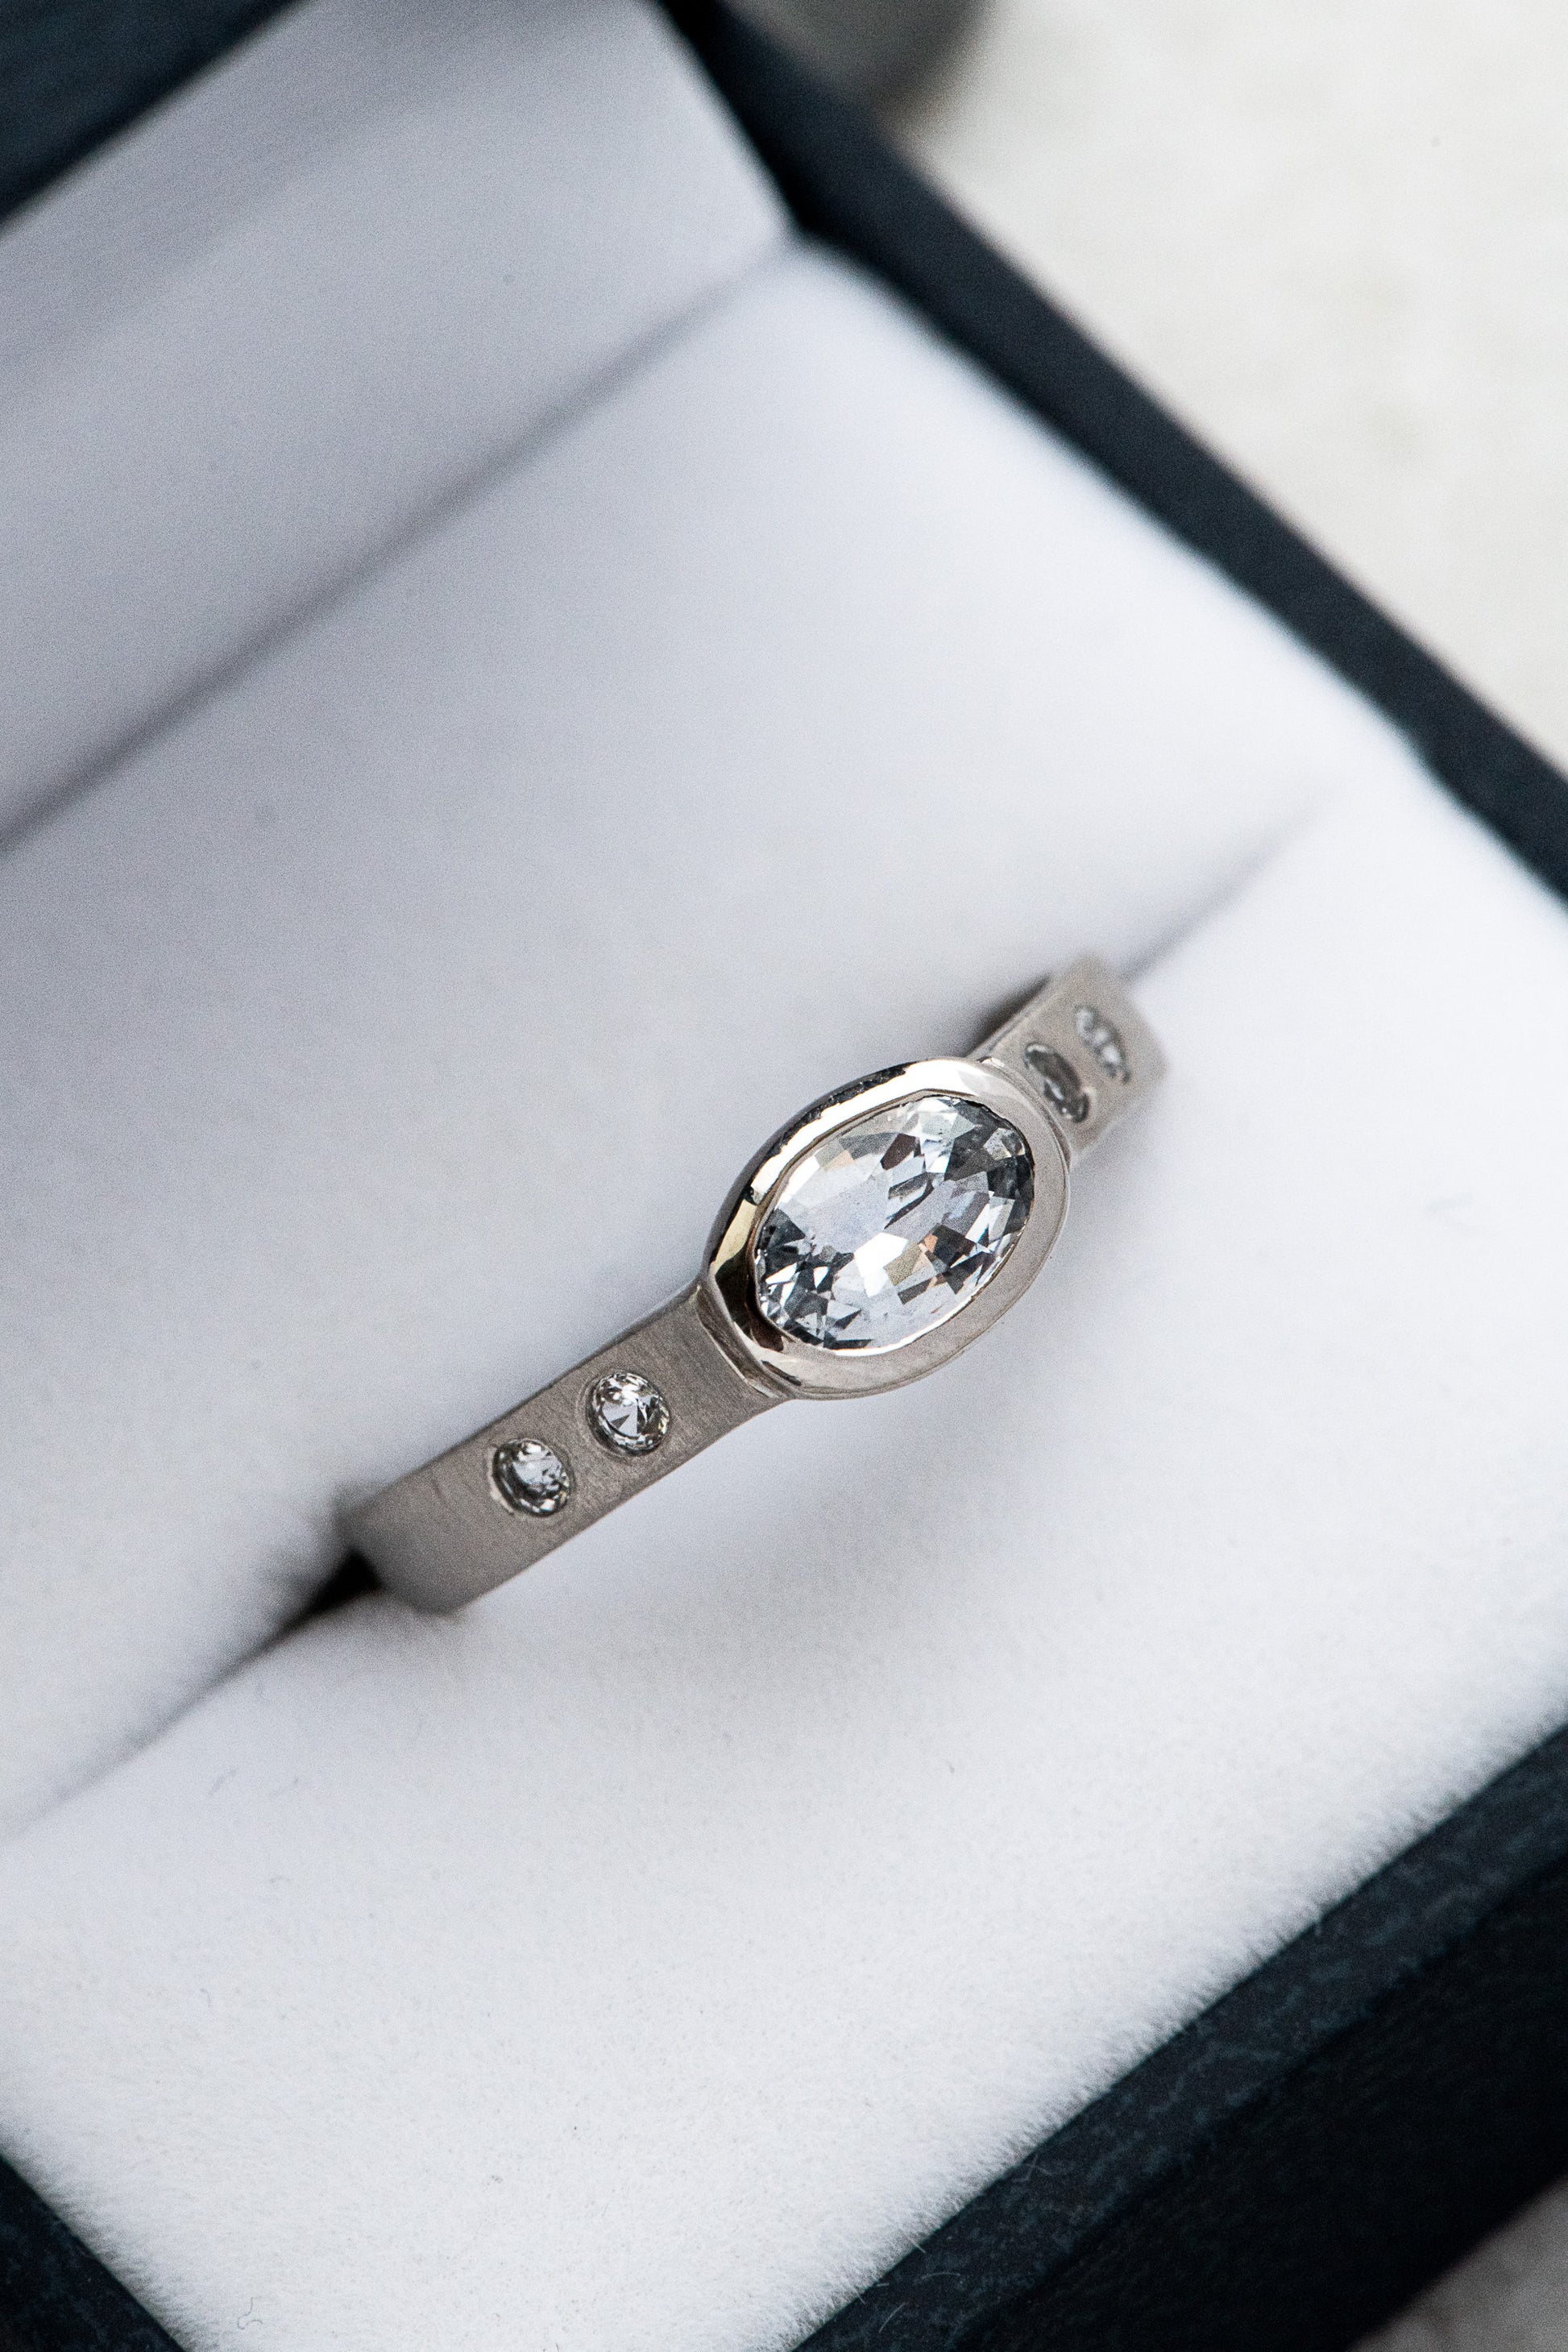 An oval Handmade White Sapphire Engagement Ring in a box by Cassin Jewelry.